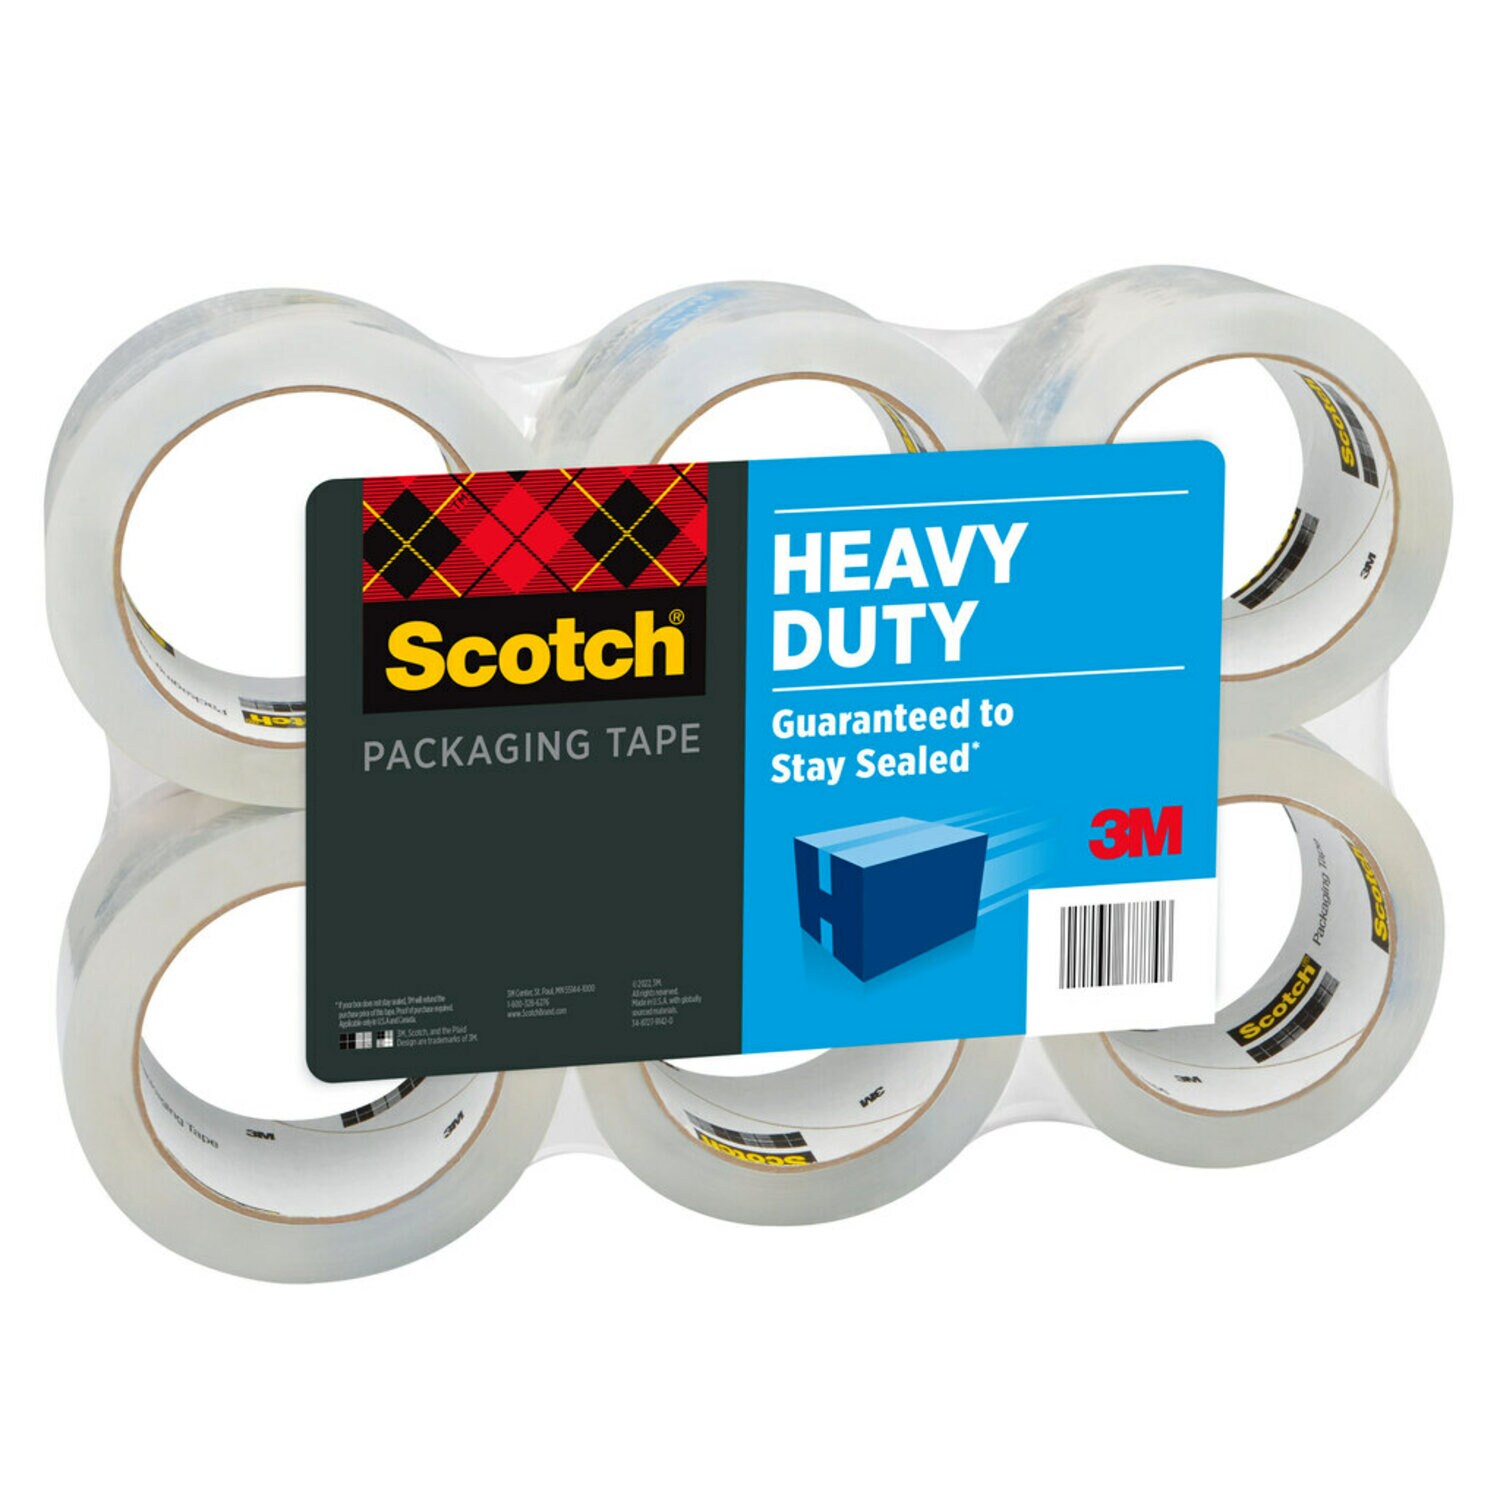 7100158251 - Scotch Heavy Duty Shipping Packaging Tape, 3850-40-6, 1.88 in x 43.7 yd
(48 mm x 40 m) 6 Pack